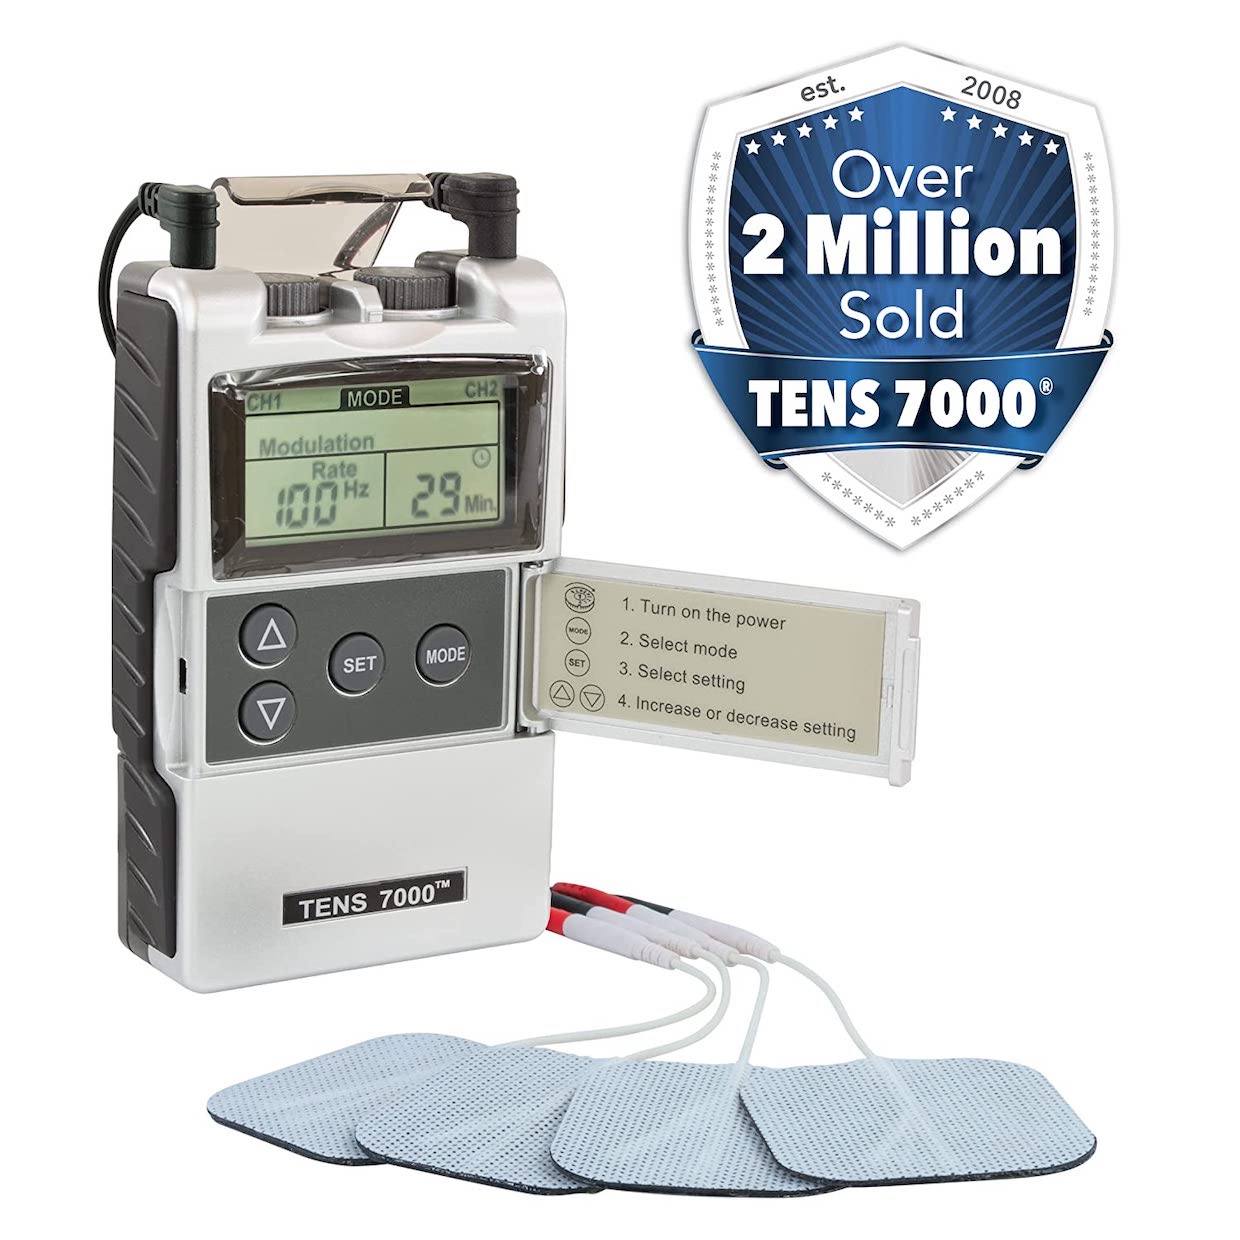 Portable Digital TENS Unit with Starter Kit and Case - TENS 7000